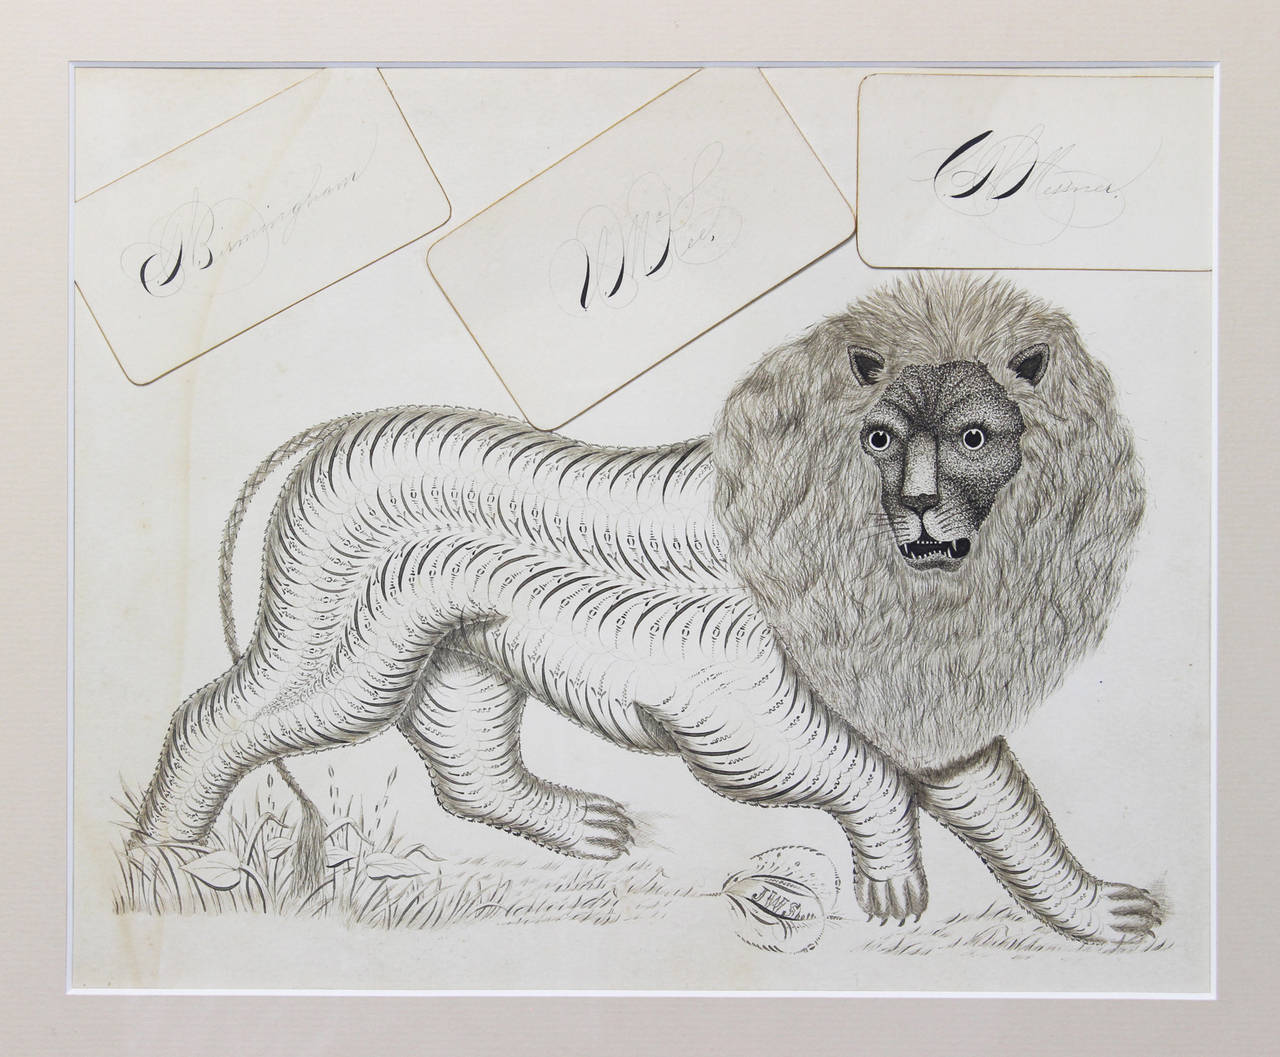 A charming mid-19th century calligraphy work lion signed by the artist.
The piece is matted on acid free paper and behind museum glass set in a burl wood frame.